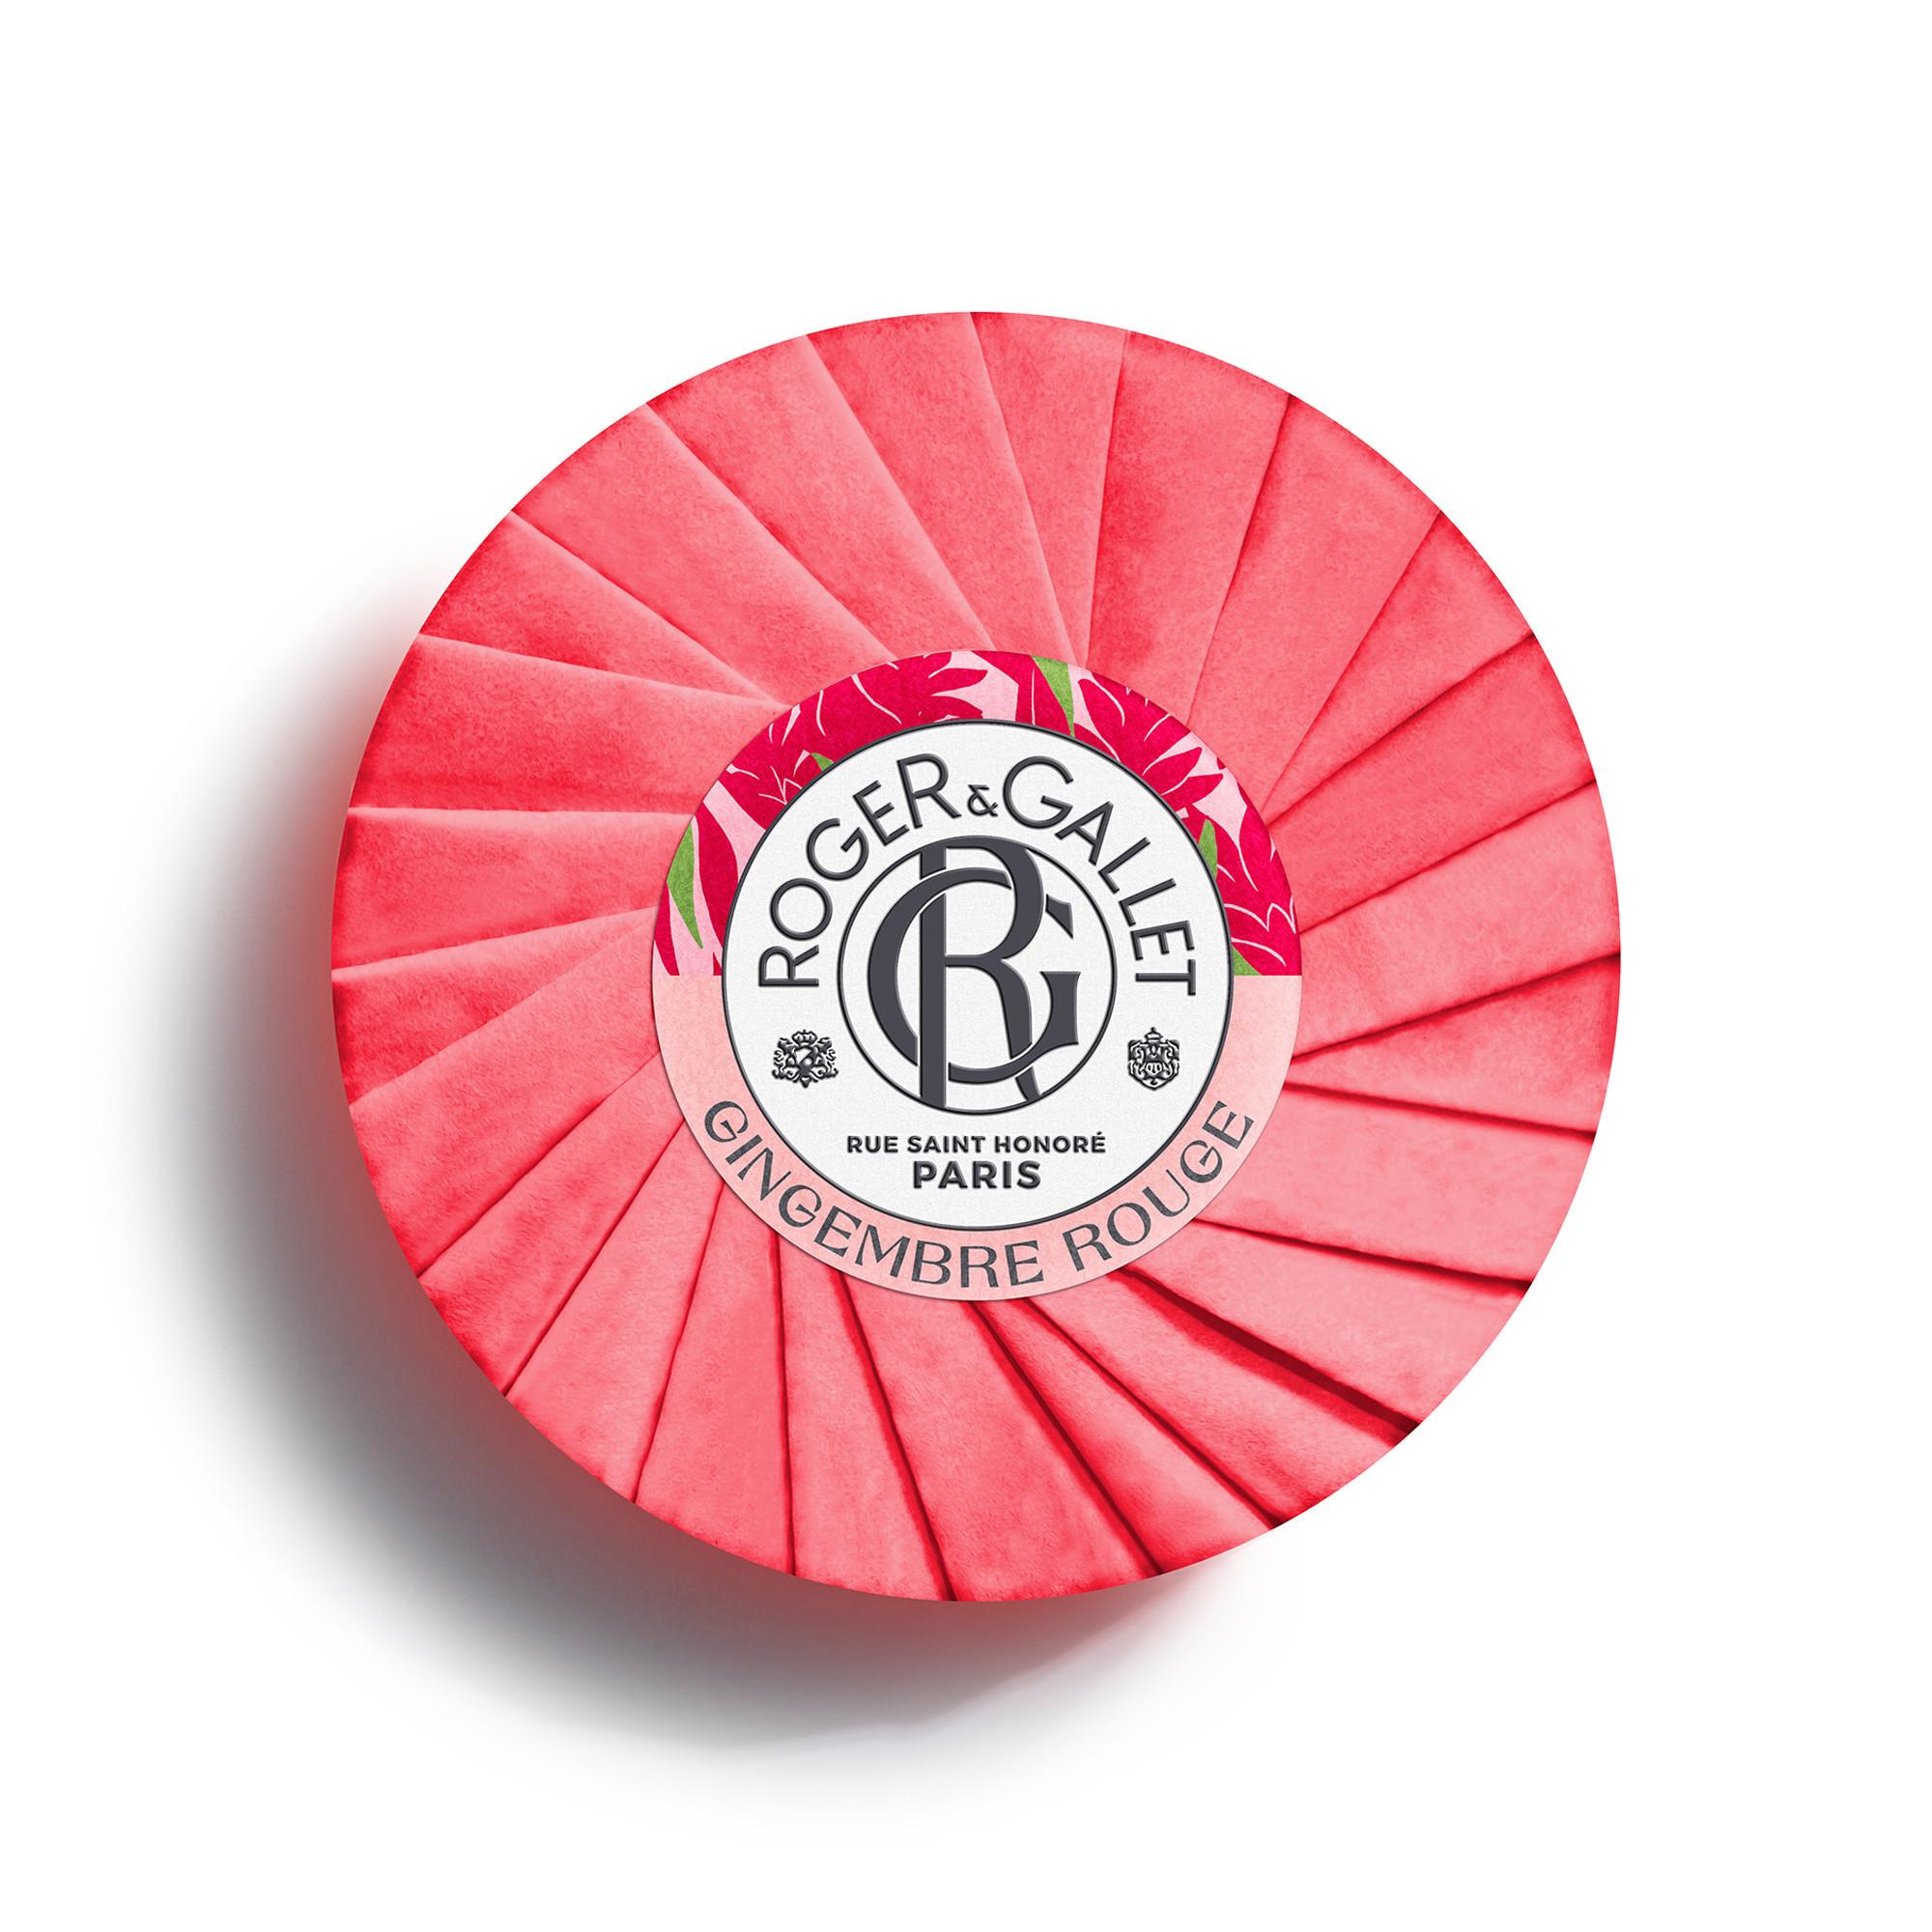 ROGER & GALLET Gingembre Rouge Wohlfühl-Seife 